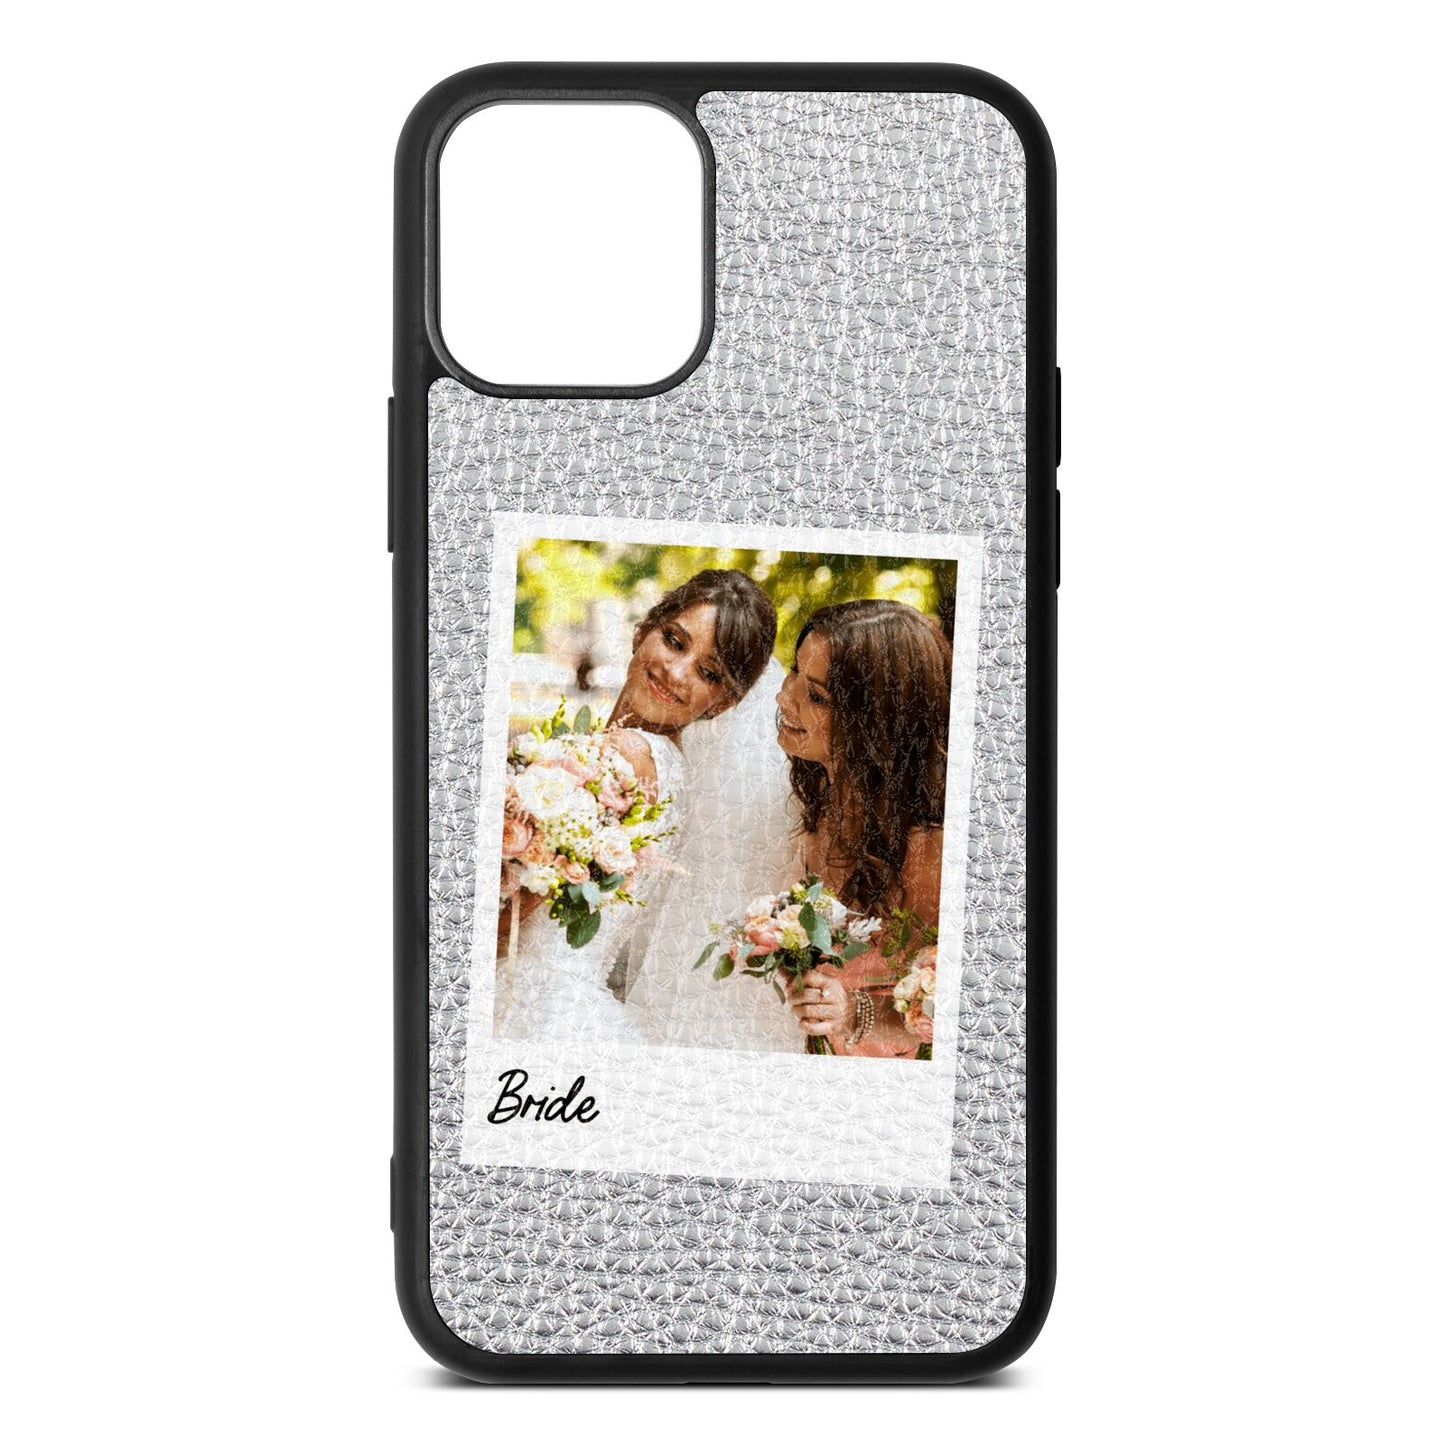 Bridal Photo Silver Pebble Leather iPhone 11 Case